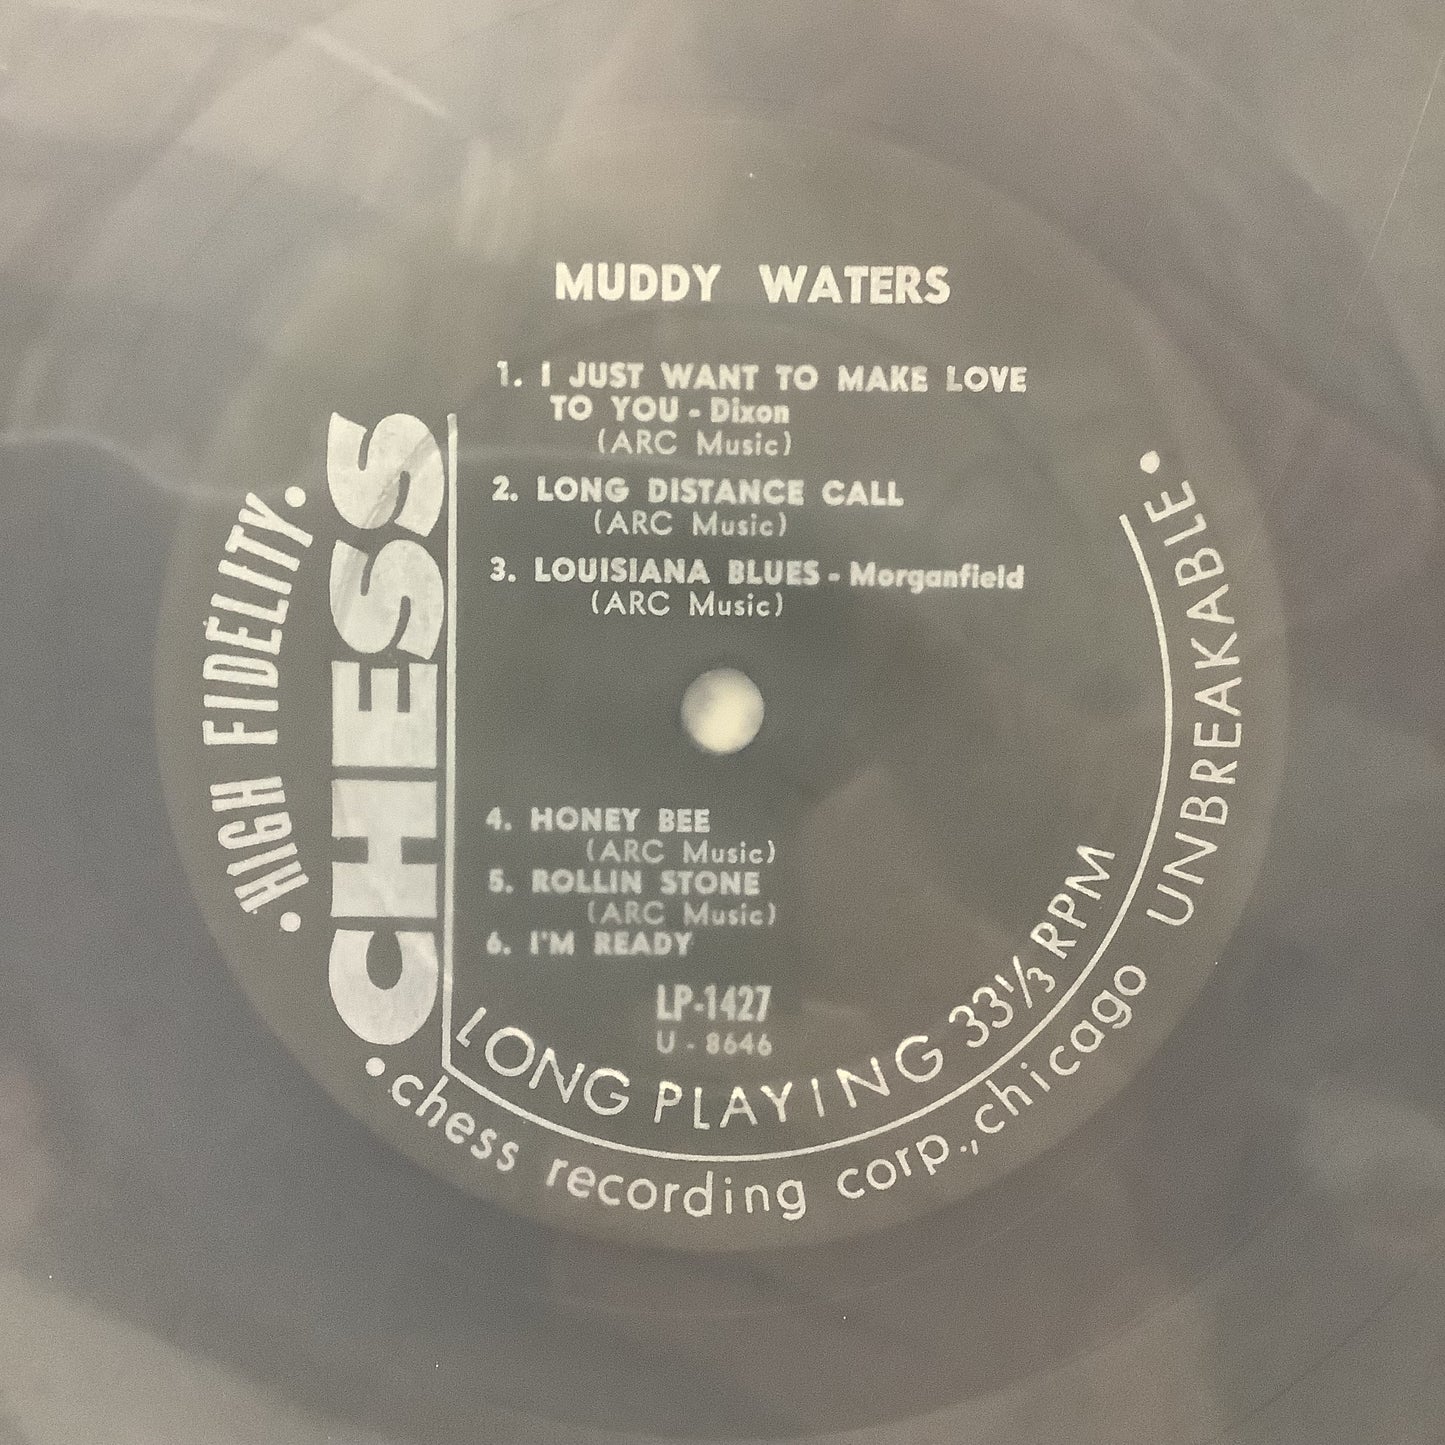 Muddy Waters - The Best of Muddy Waters - Chess LP